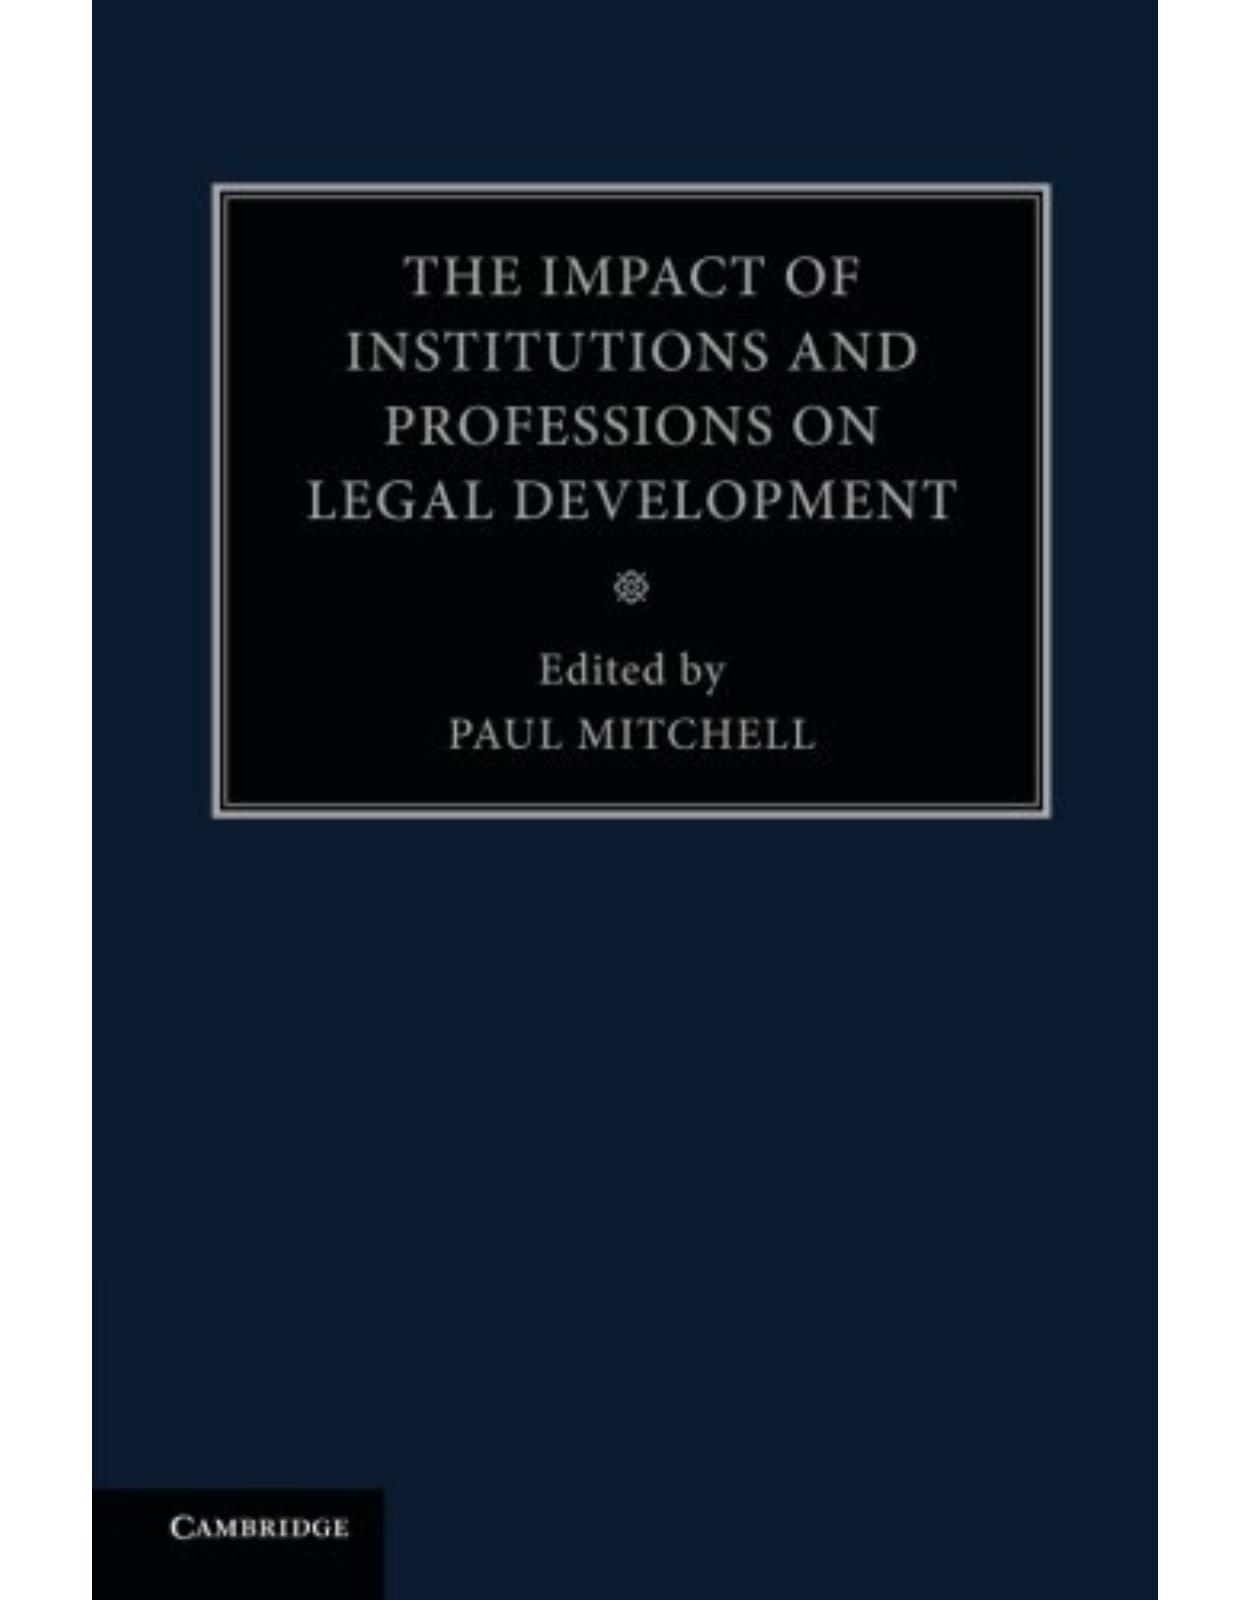 The Impact of Institutions and Professions on Legal Development: Volume 8